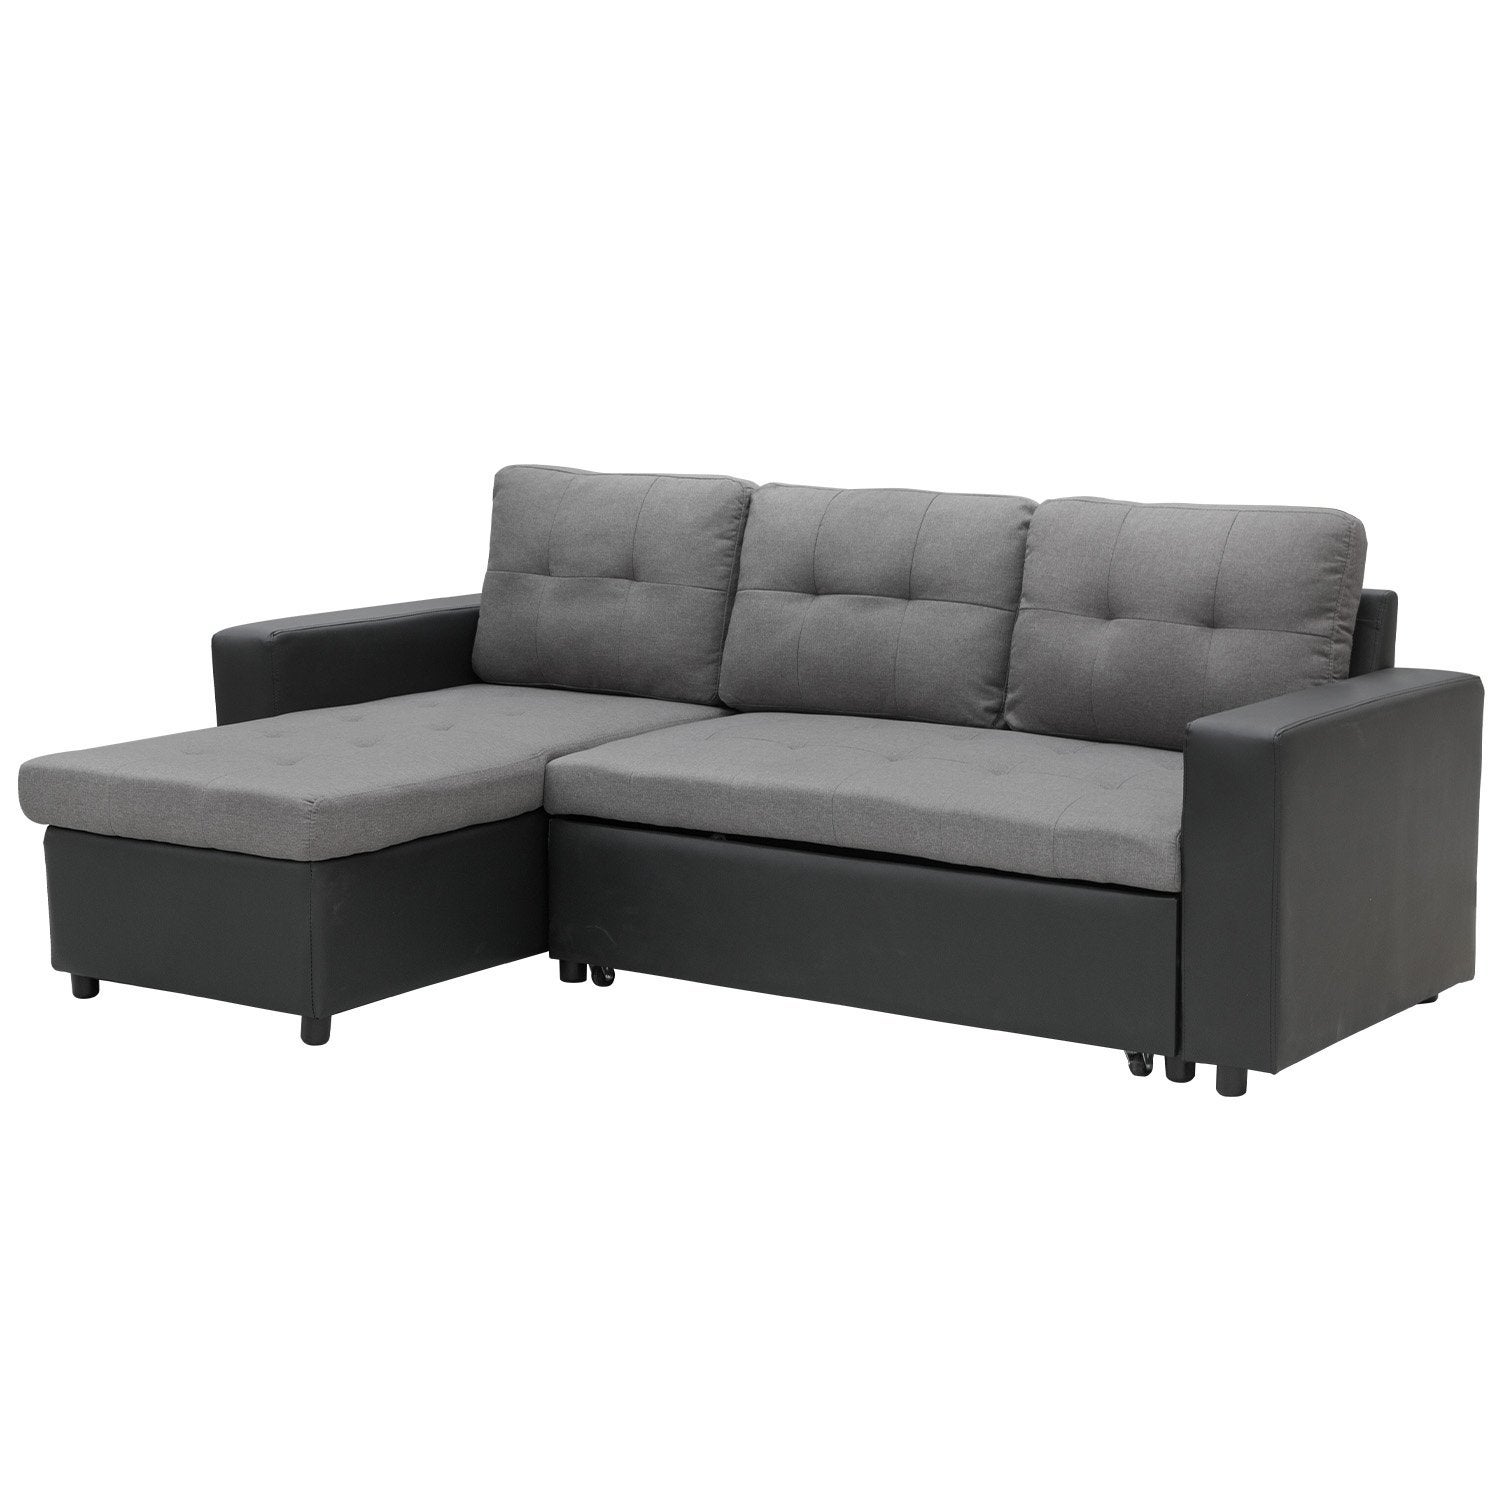 3-Seater Corner Sofa Bed with Storage Lounge Chaise Linen ...